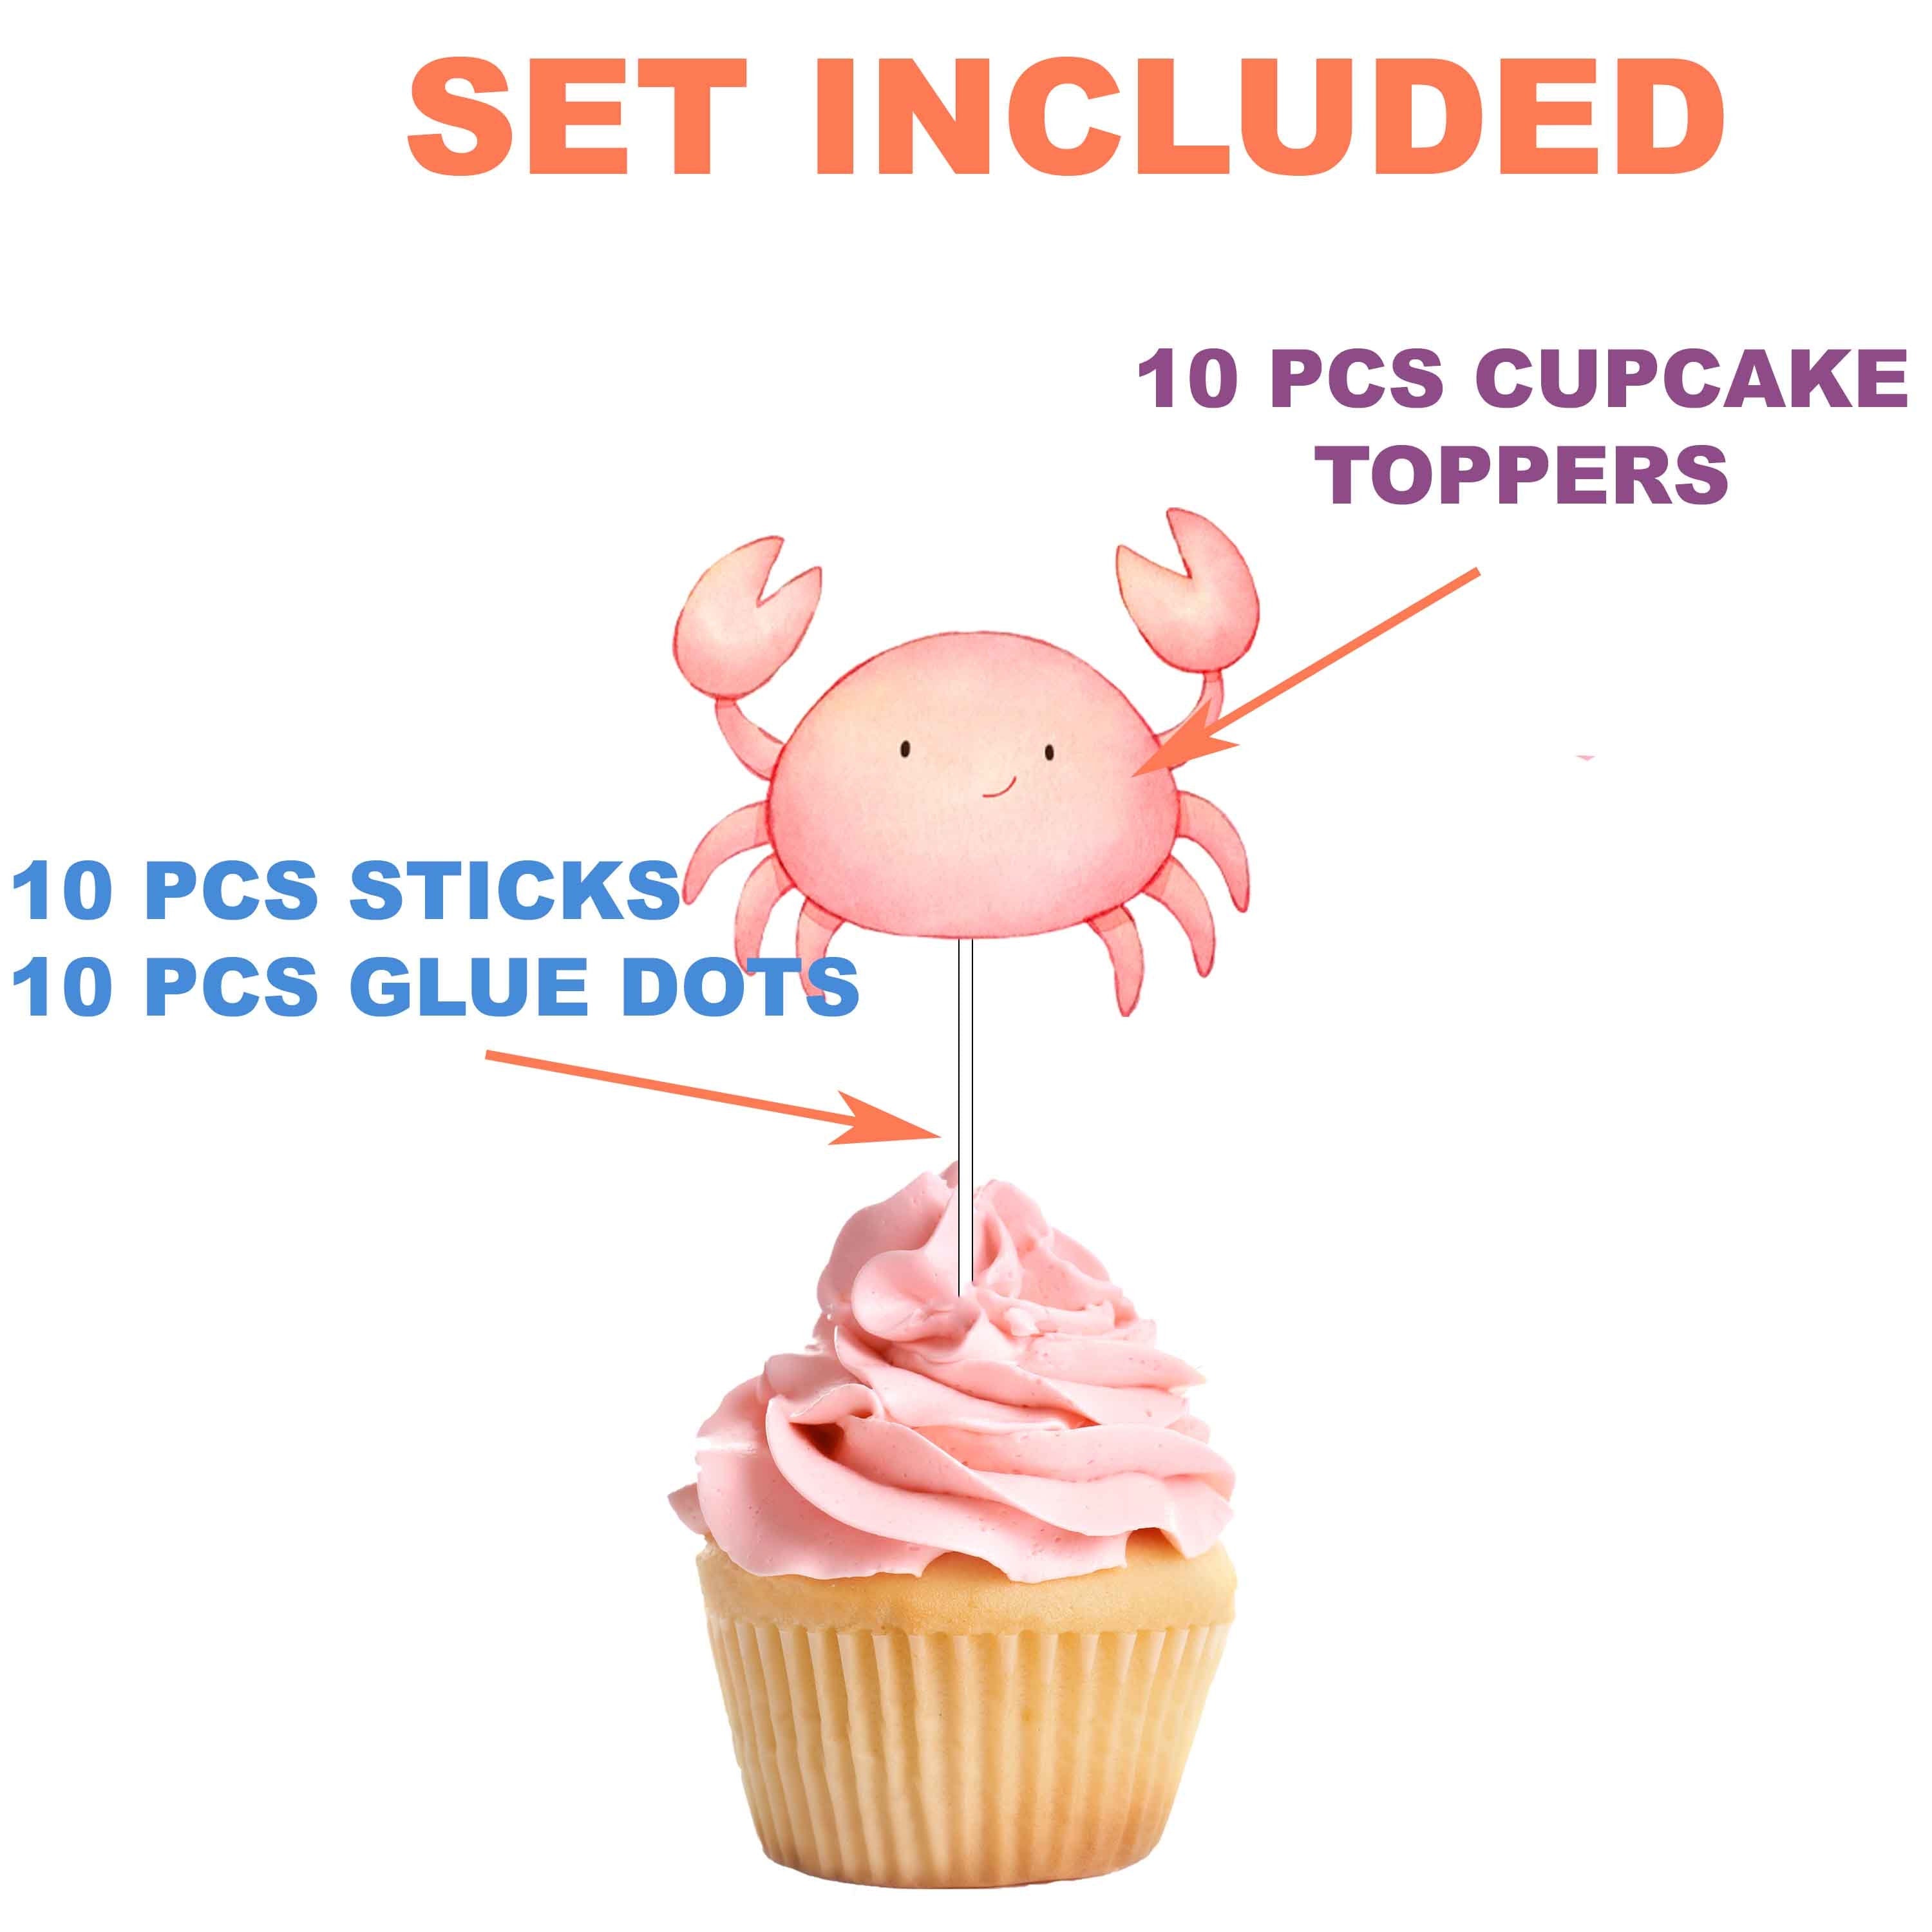 Dive Into Delight with "Under the Sea" Cupcake Toppers - Ocean Adventure for Every Bite